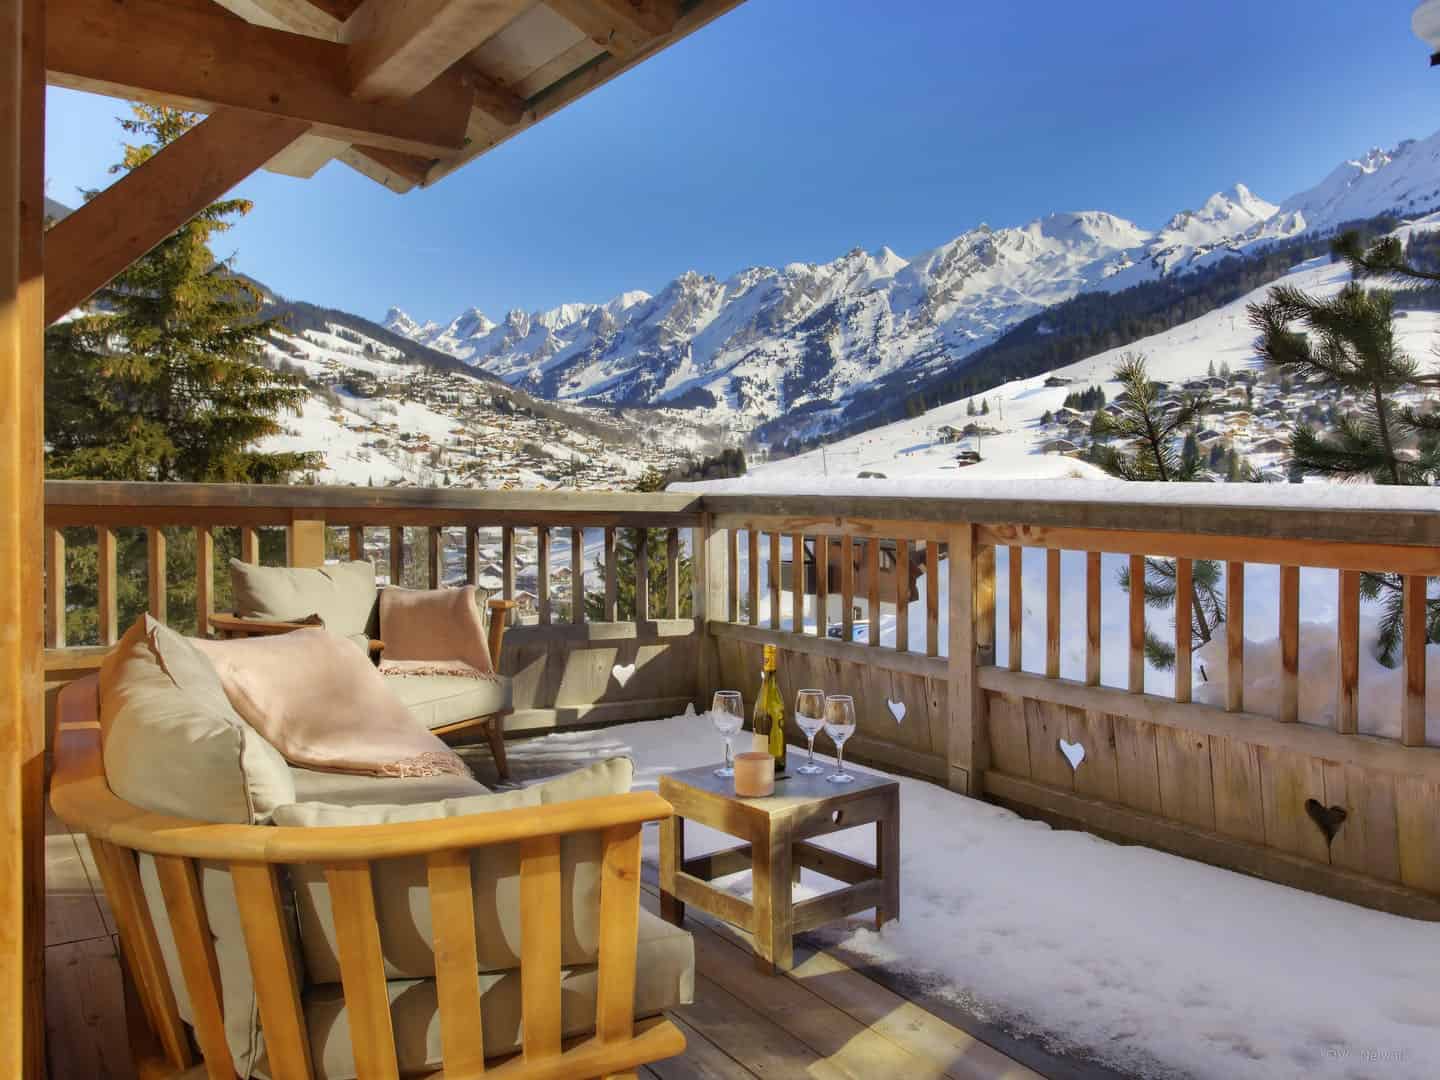 The Aravis chain as seen from the outdoor lounge on the terrace at Chalet Timan La Clusaz.